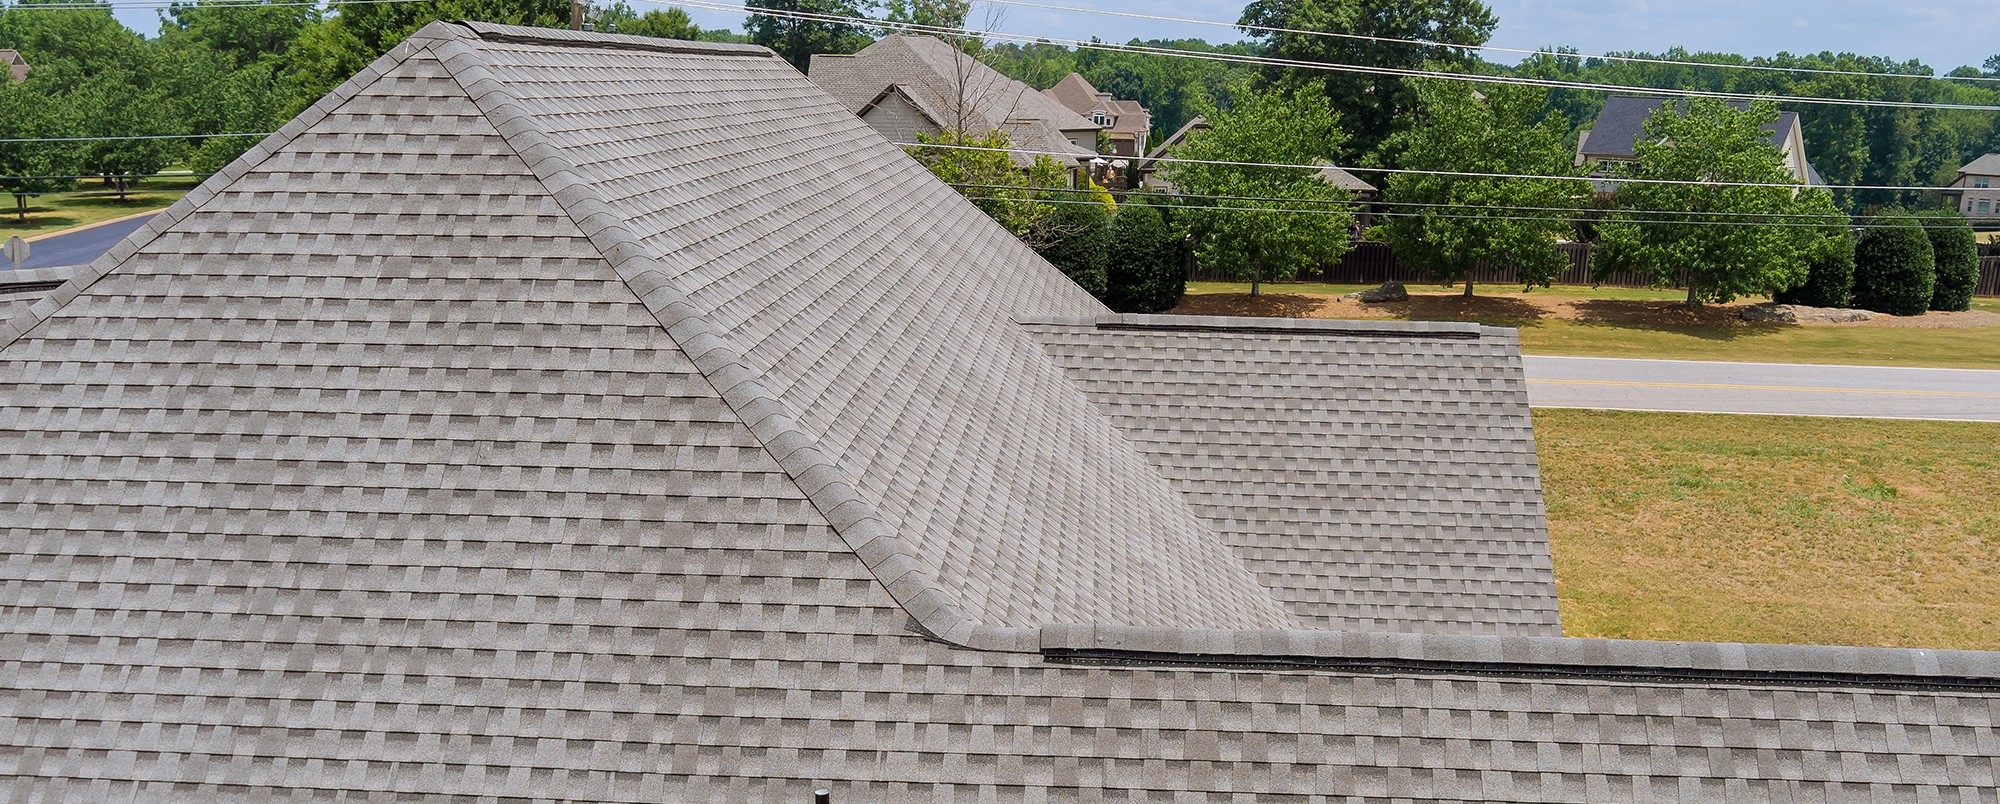 Steep residential asphalt roof on house in Indianapolis